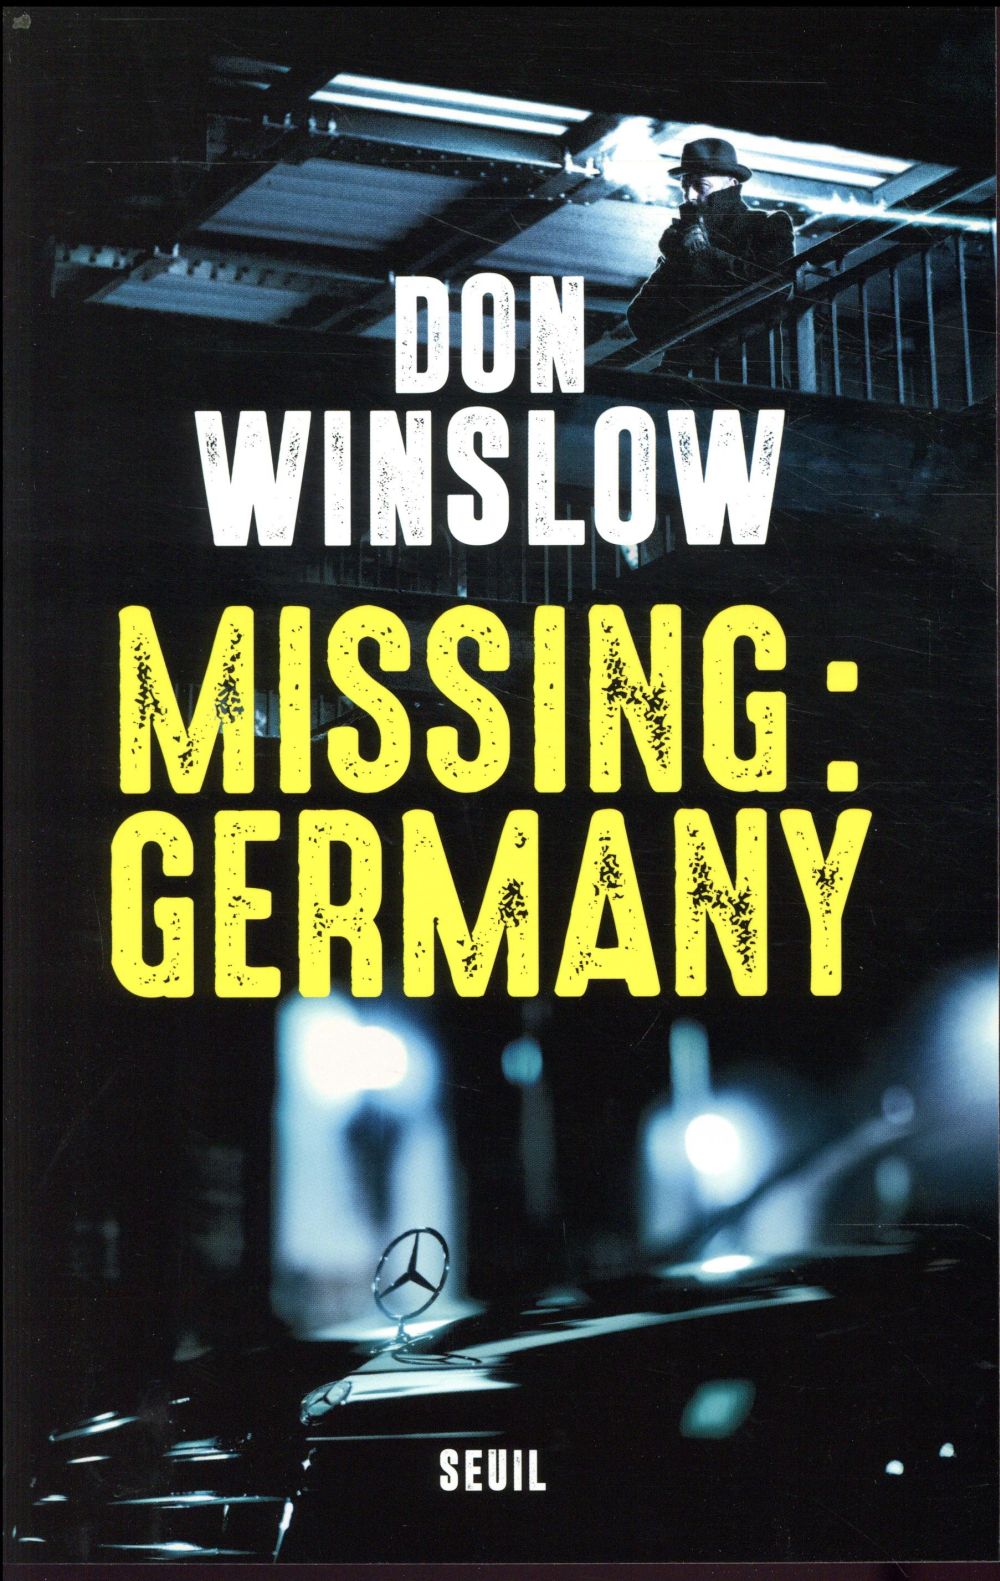 MISSING : GERMANY